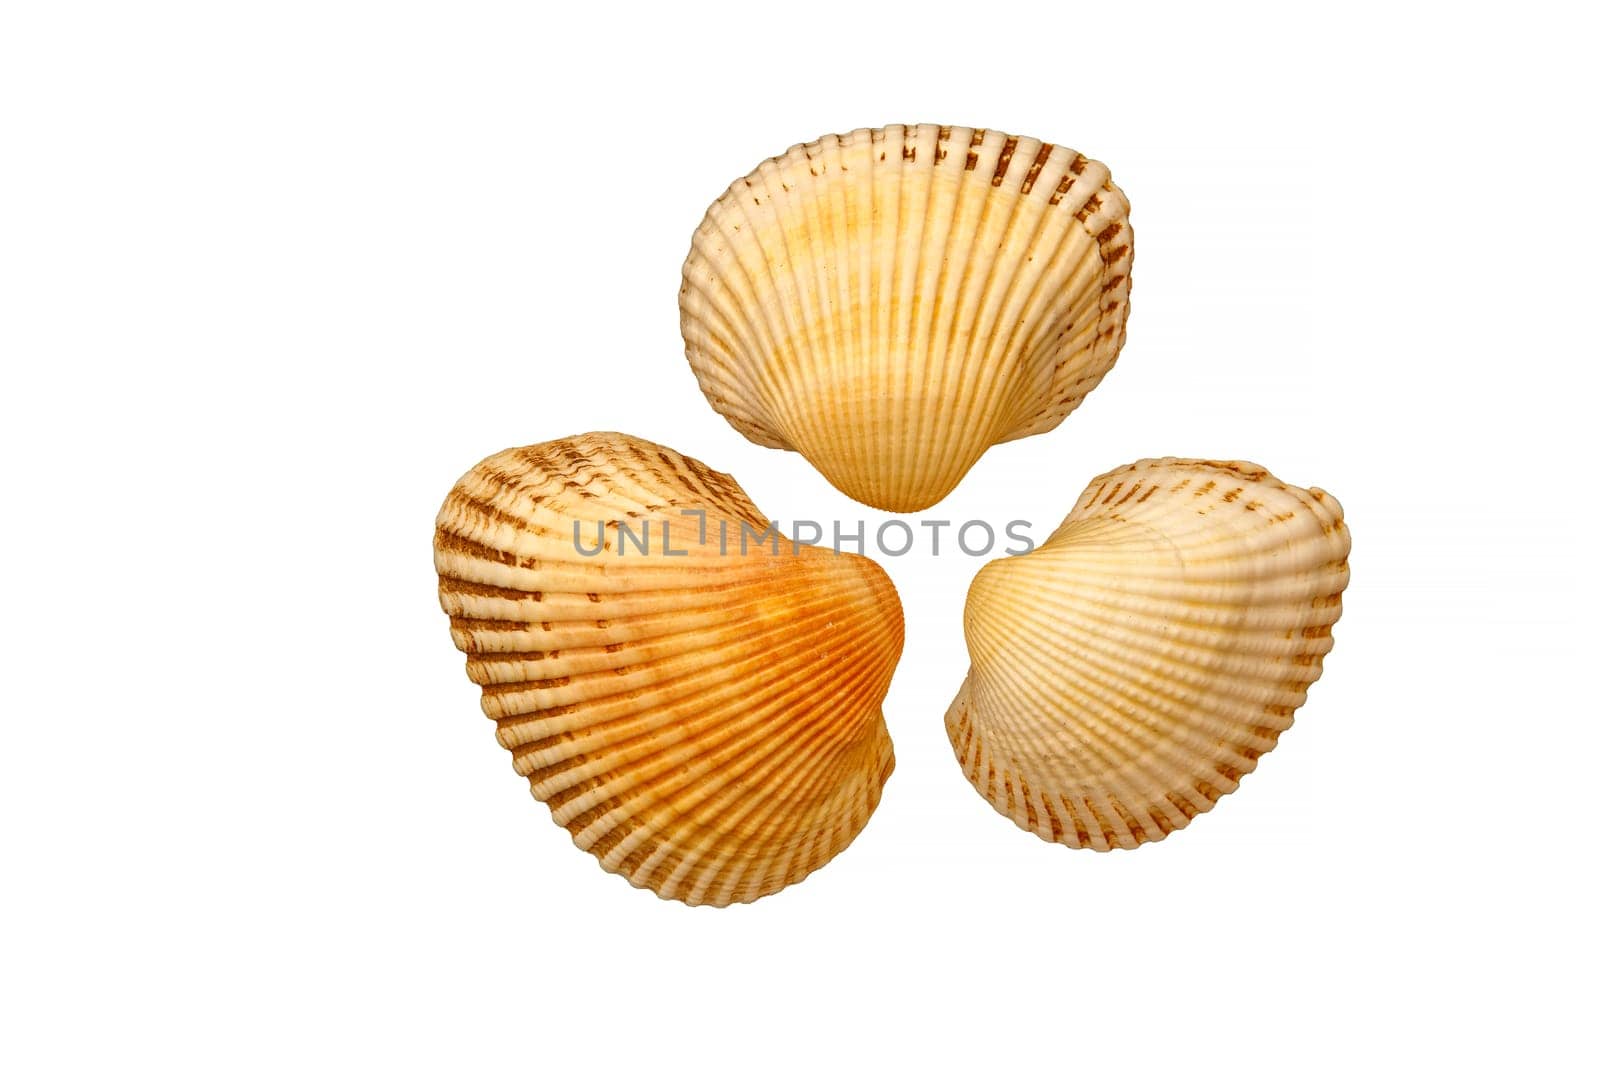 Sea clam shells, isolated on white by EdVal